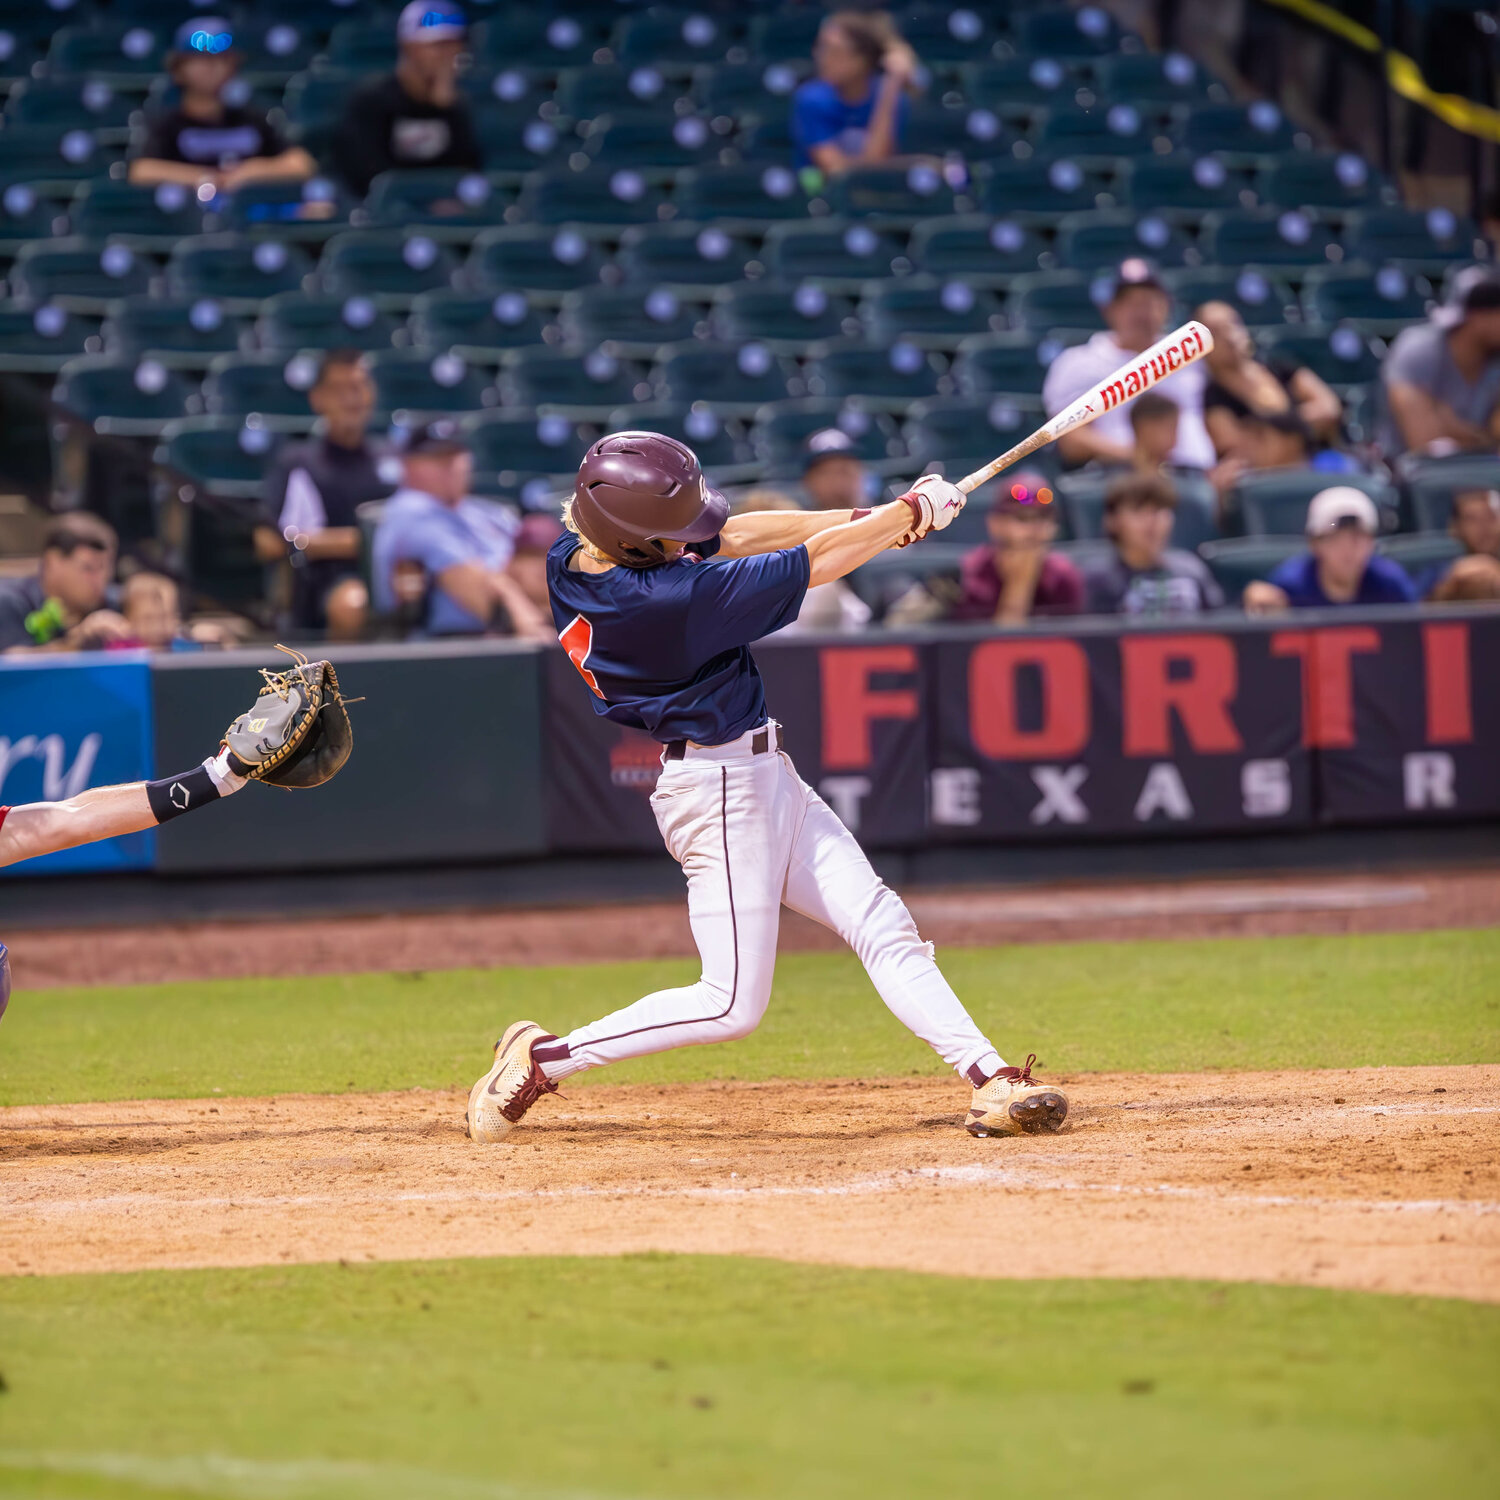 Brock DeYoung hits during Tuesday's GHBCA Futures All-Star game at Constellation Field in Sugar Land.